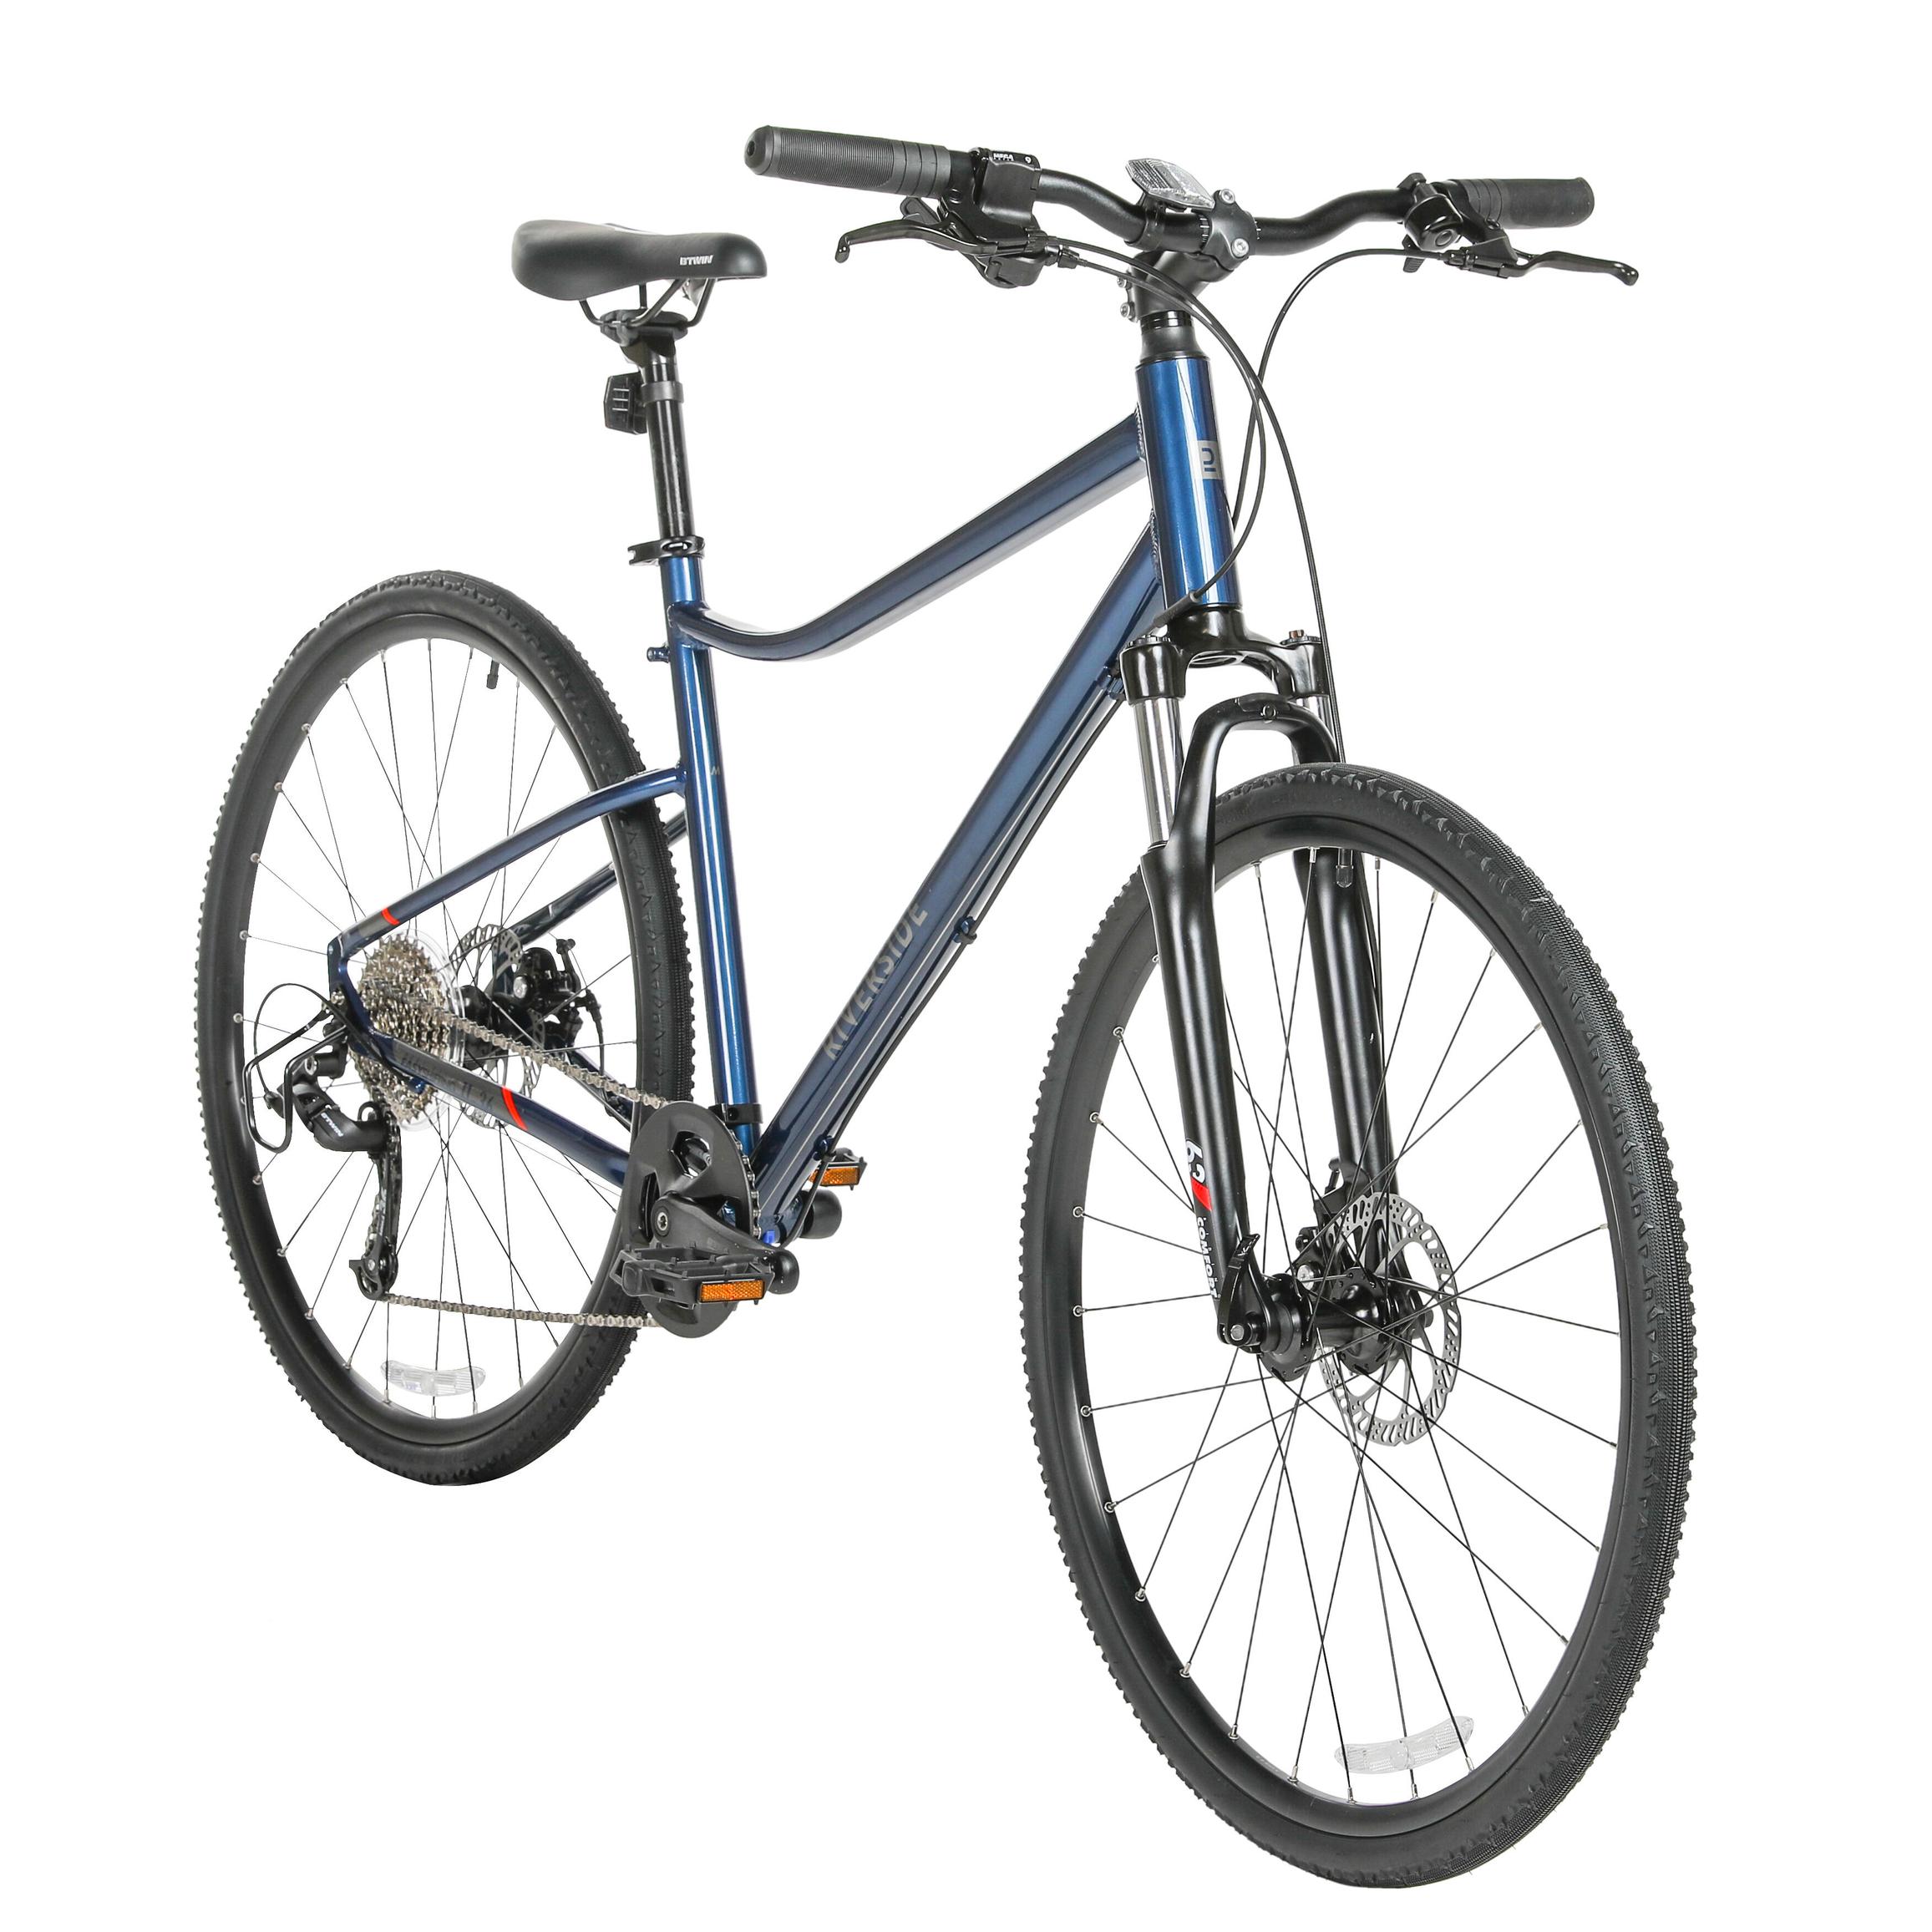 Hybrid Bike with Disc Brakes - HYTR 500 offers at $490 in Decathlon